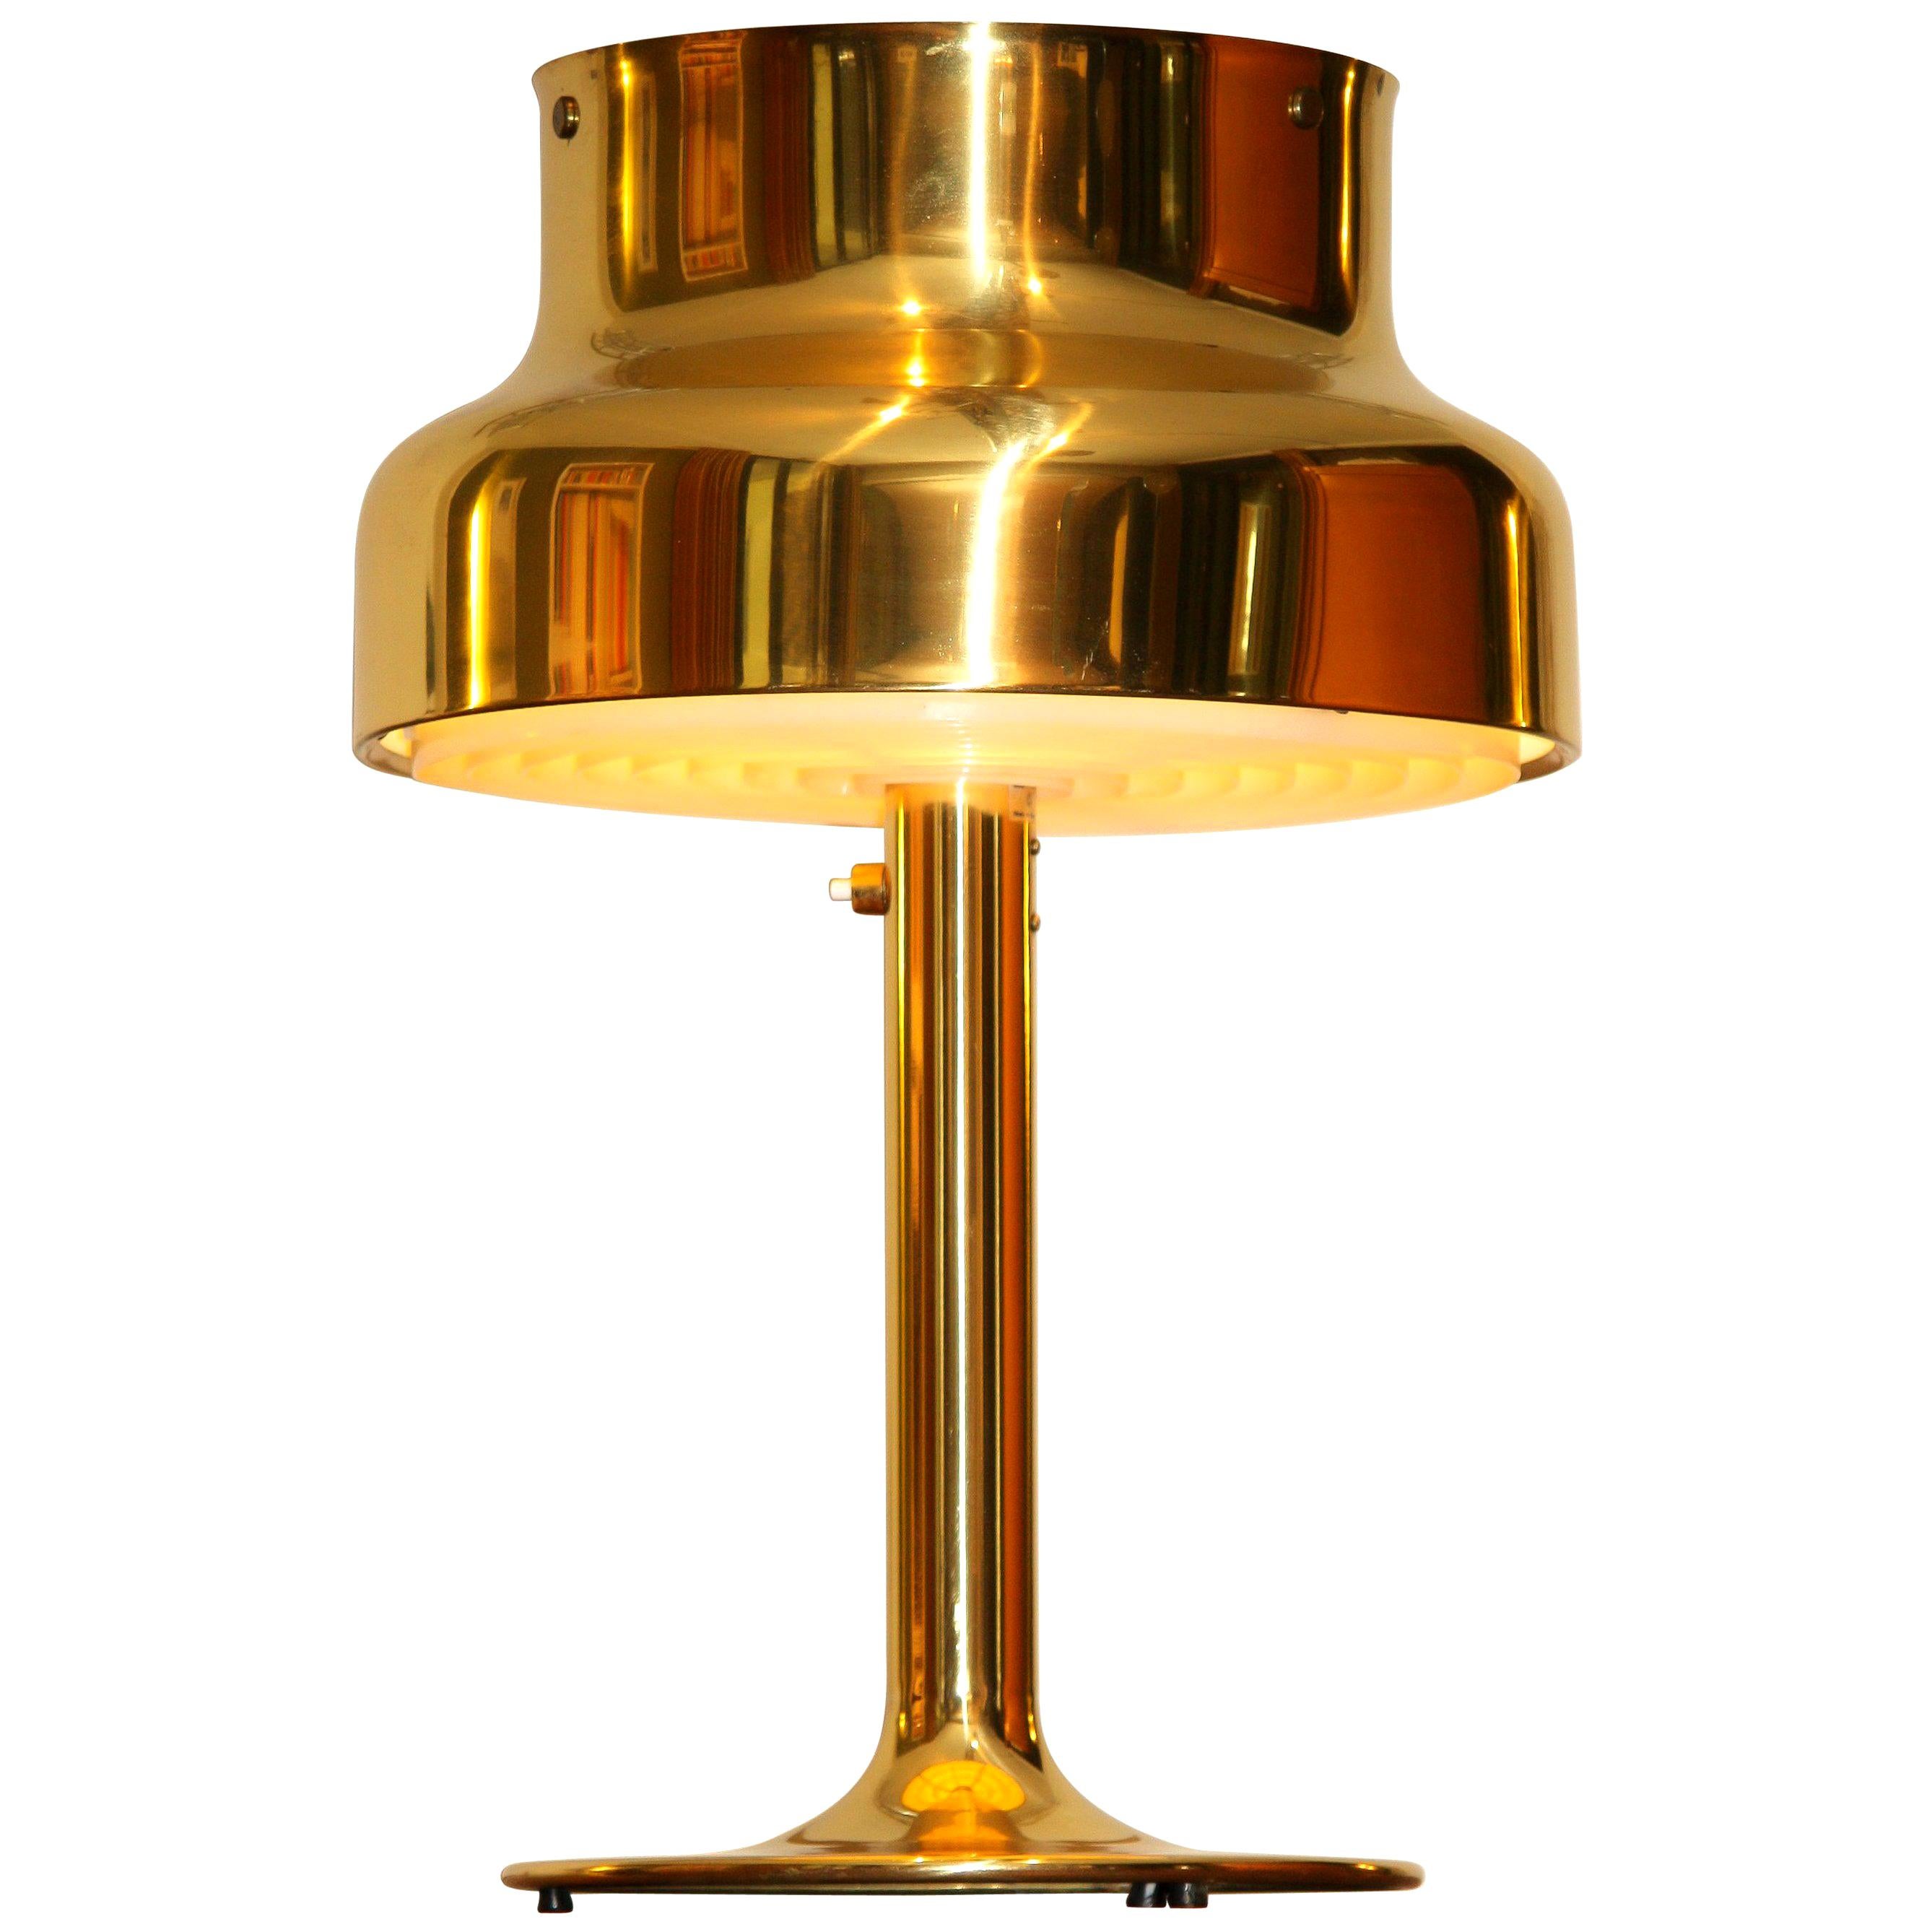 1960s, Golden or Brass Table Lamp by Anders Pehrson "Bumling" for Ateljé Lyktan